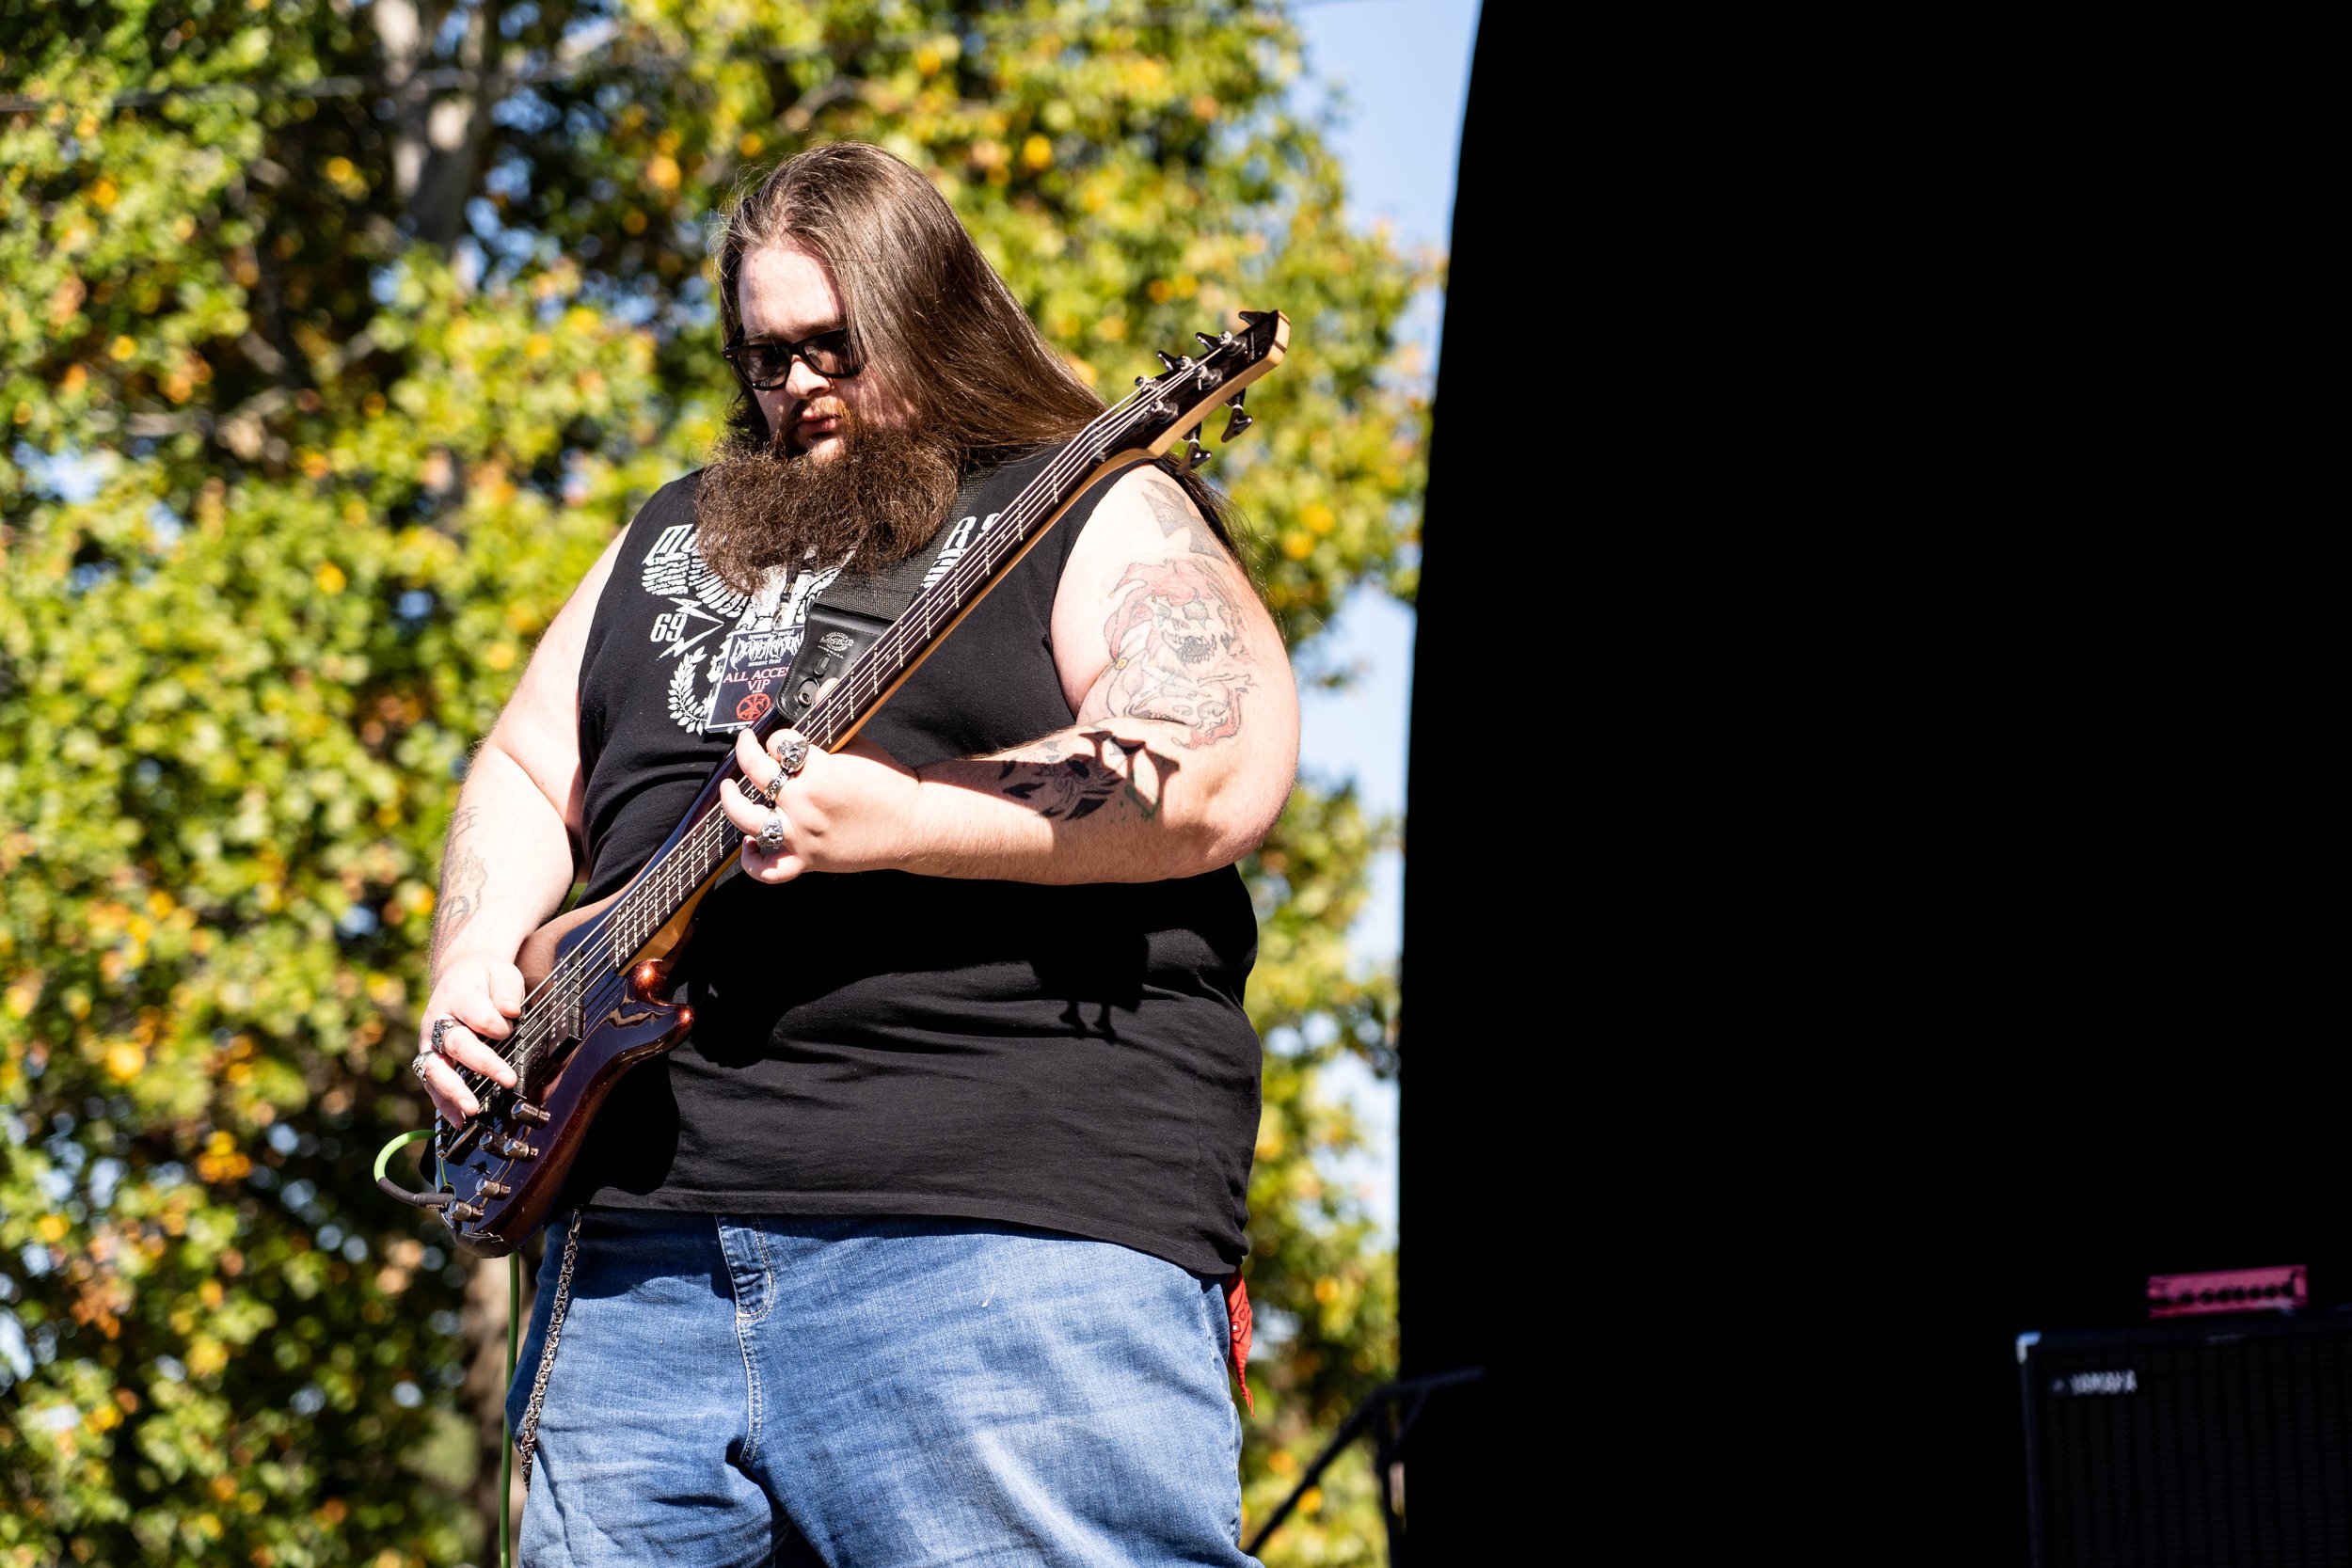 The Red Mountain at Tennessee Metal Devastation Festival